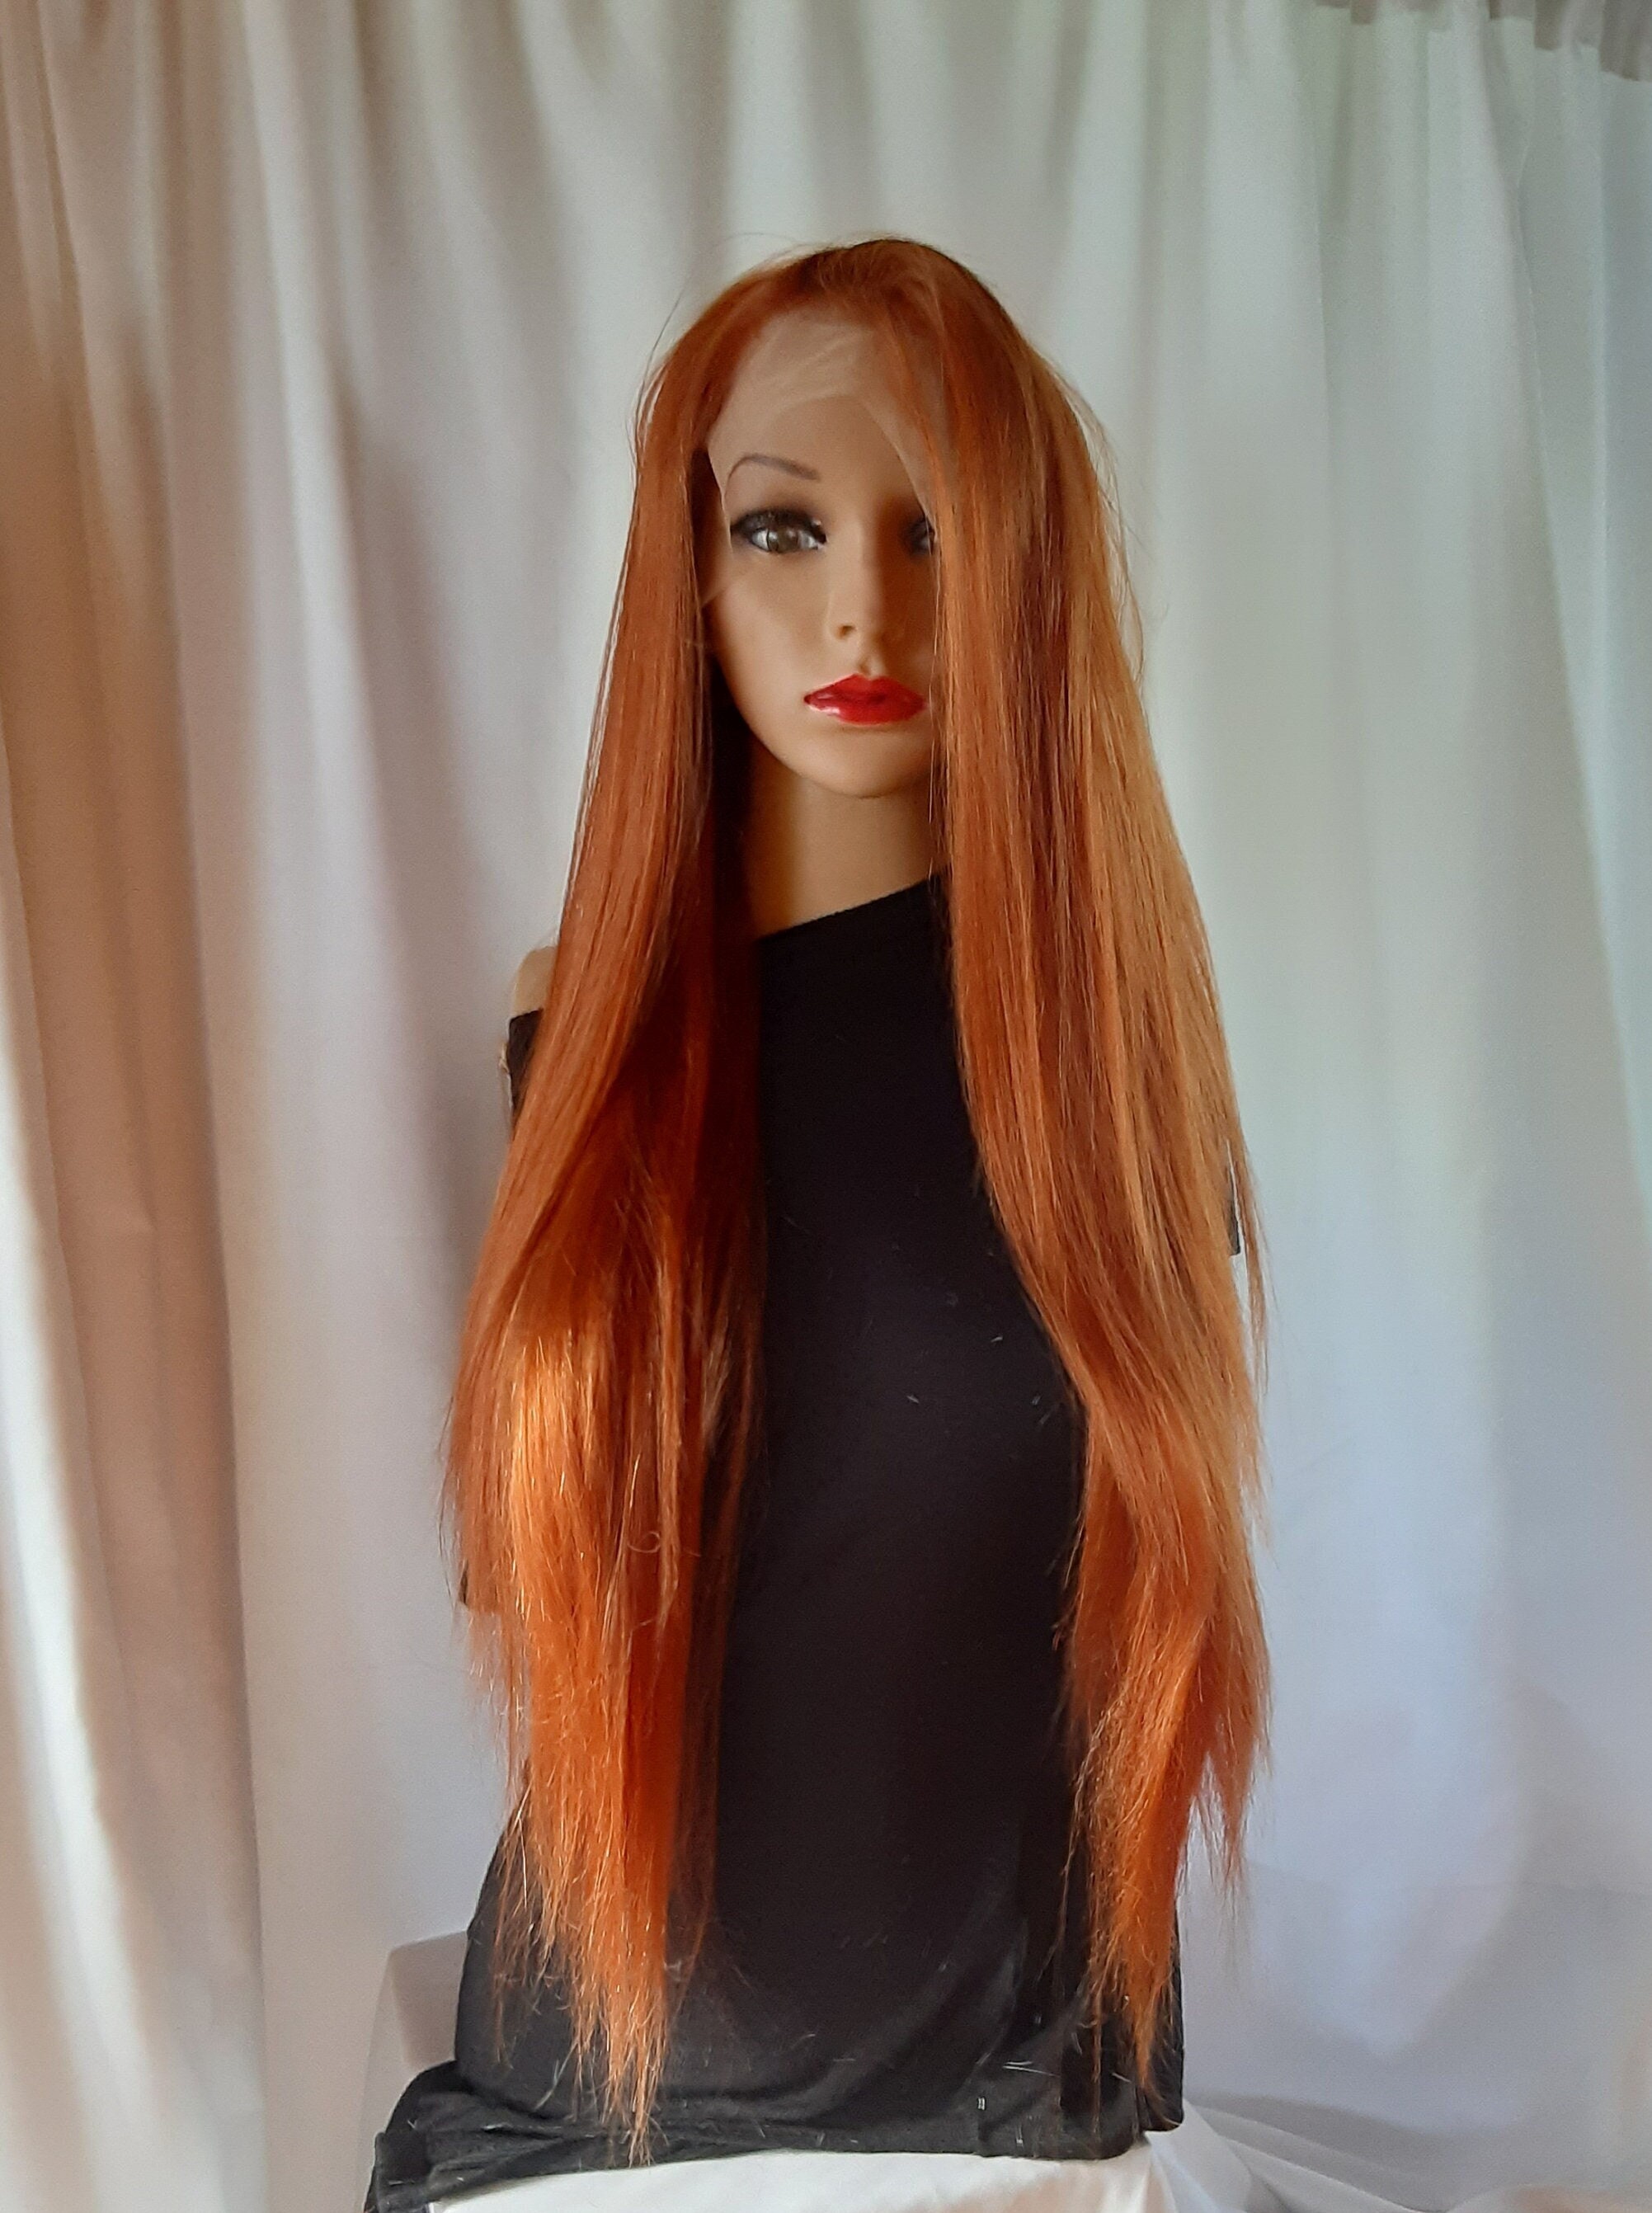 Professional Quality Fine Lace Red / Ginger / Auburn Full Coverage Pubic Wig  / Merkin for Film / Theatre / TV -  Hong Kong